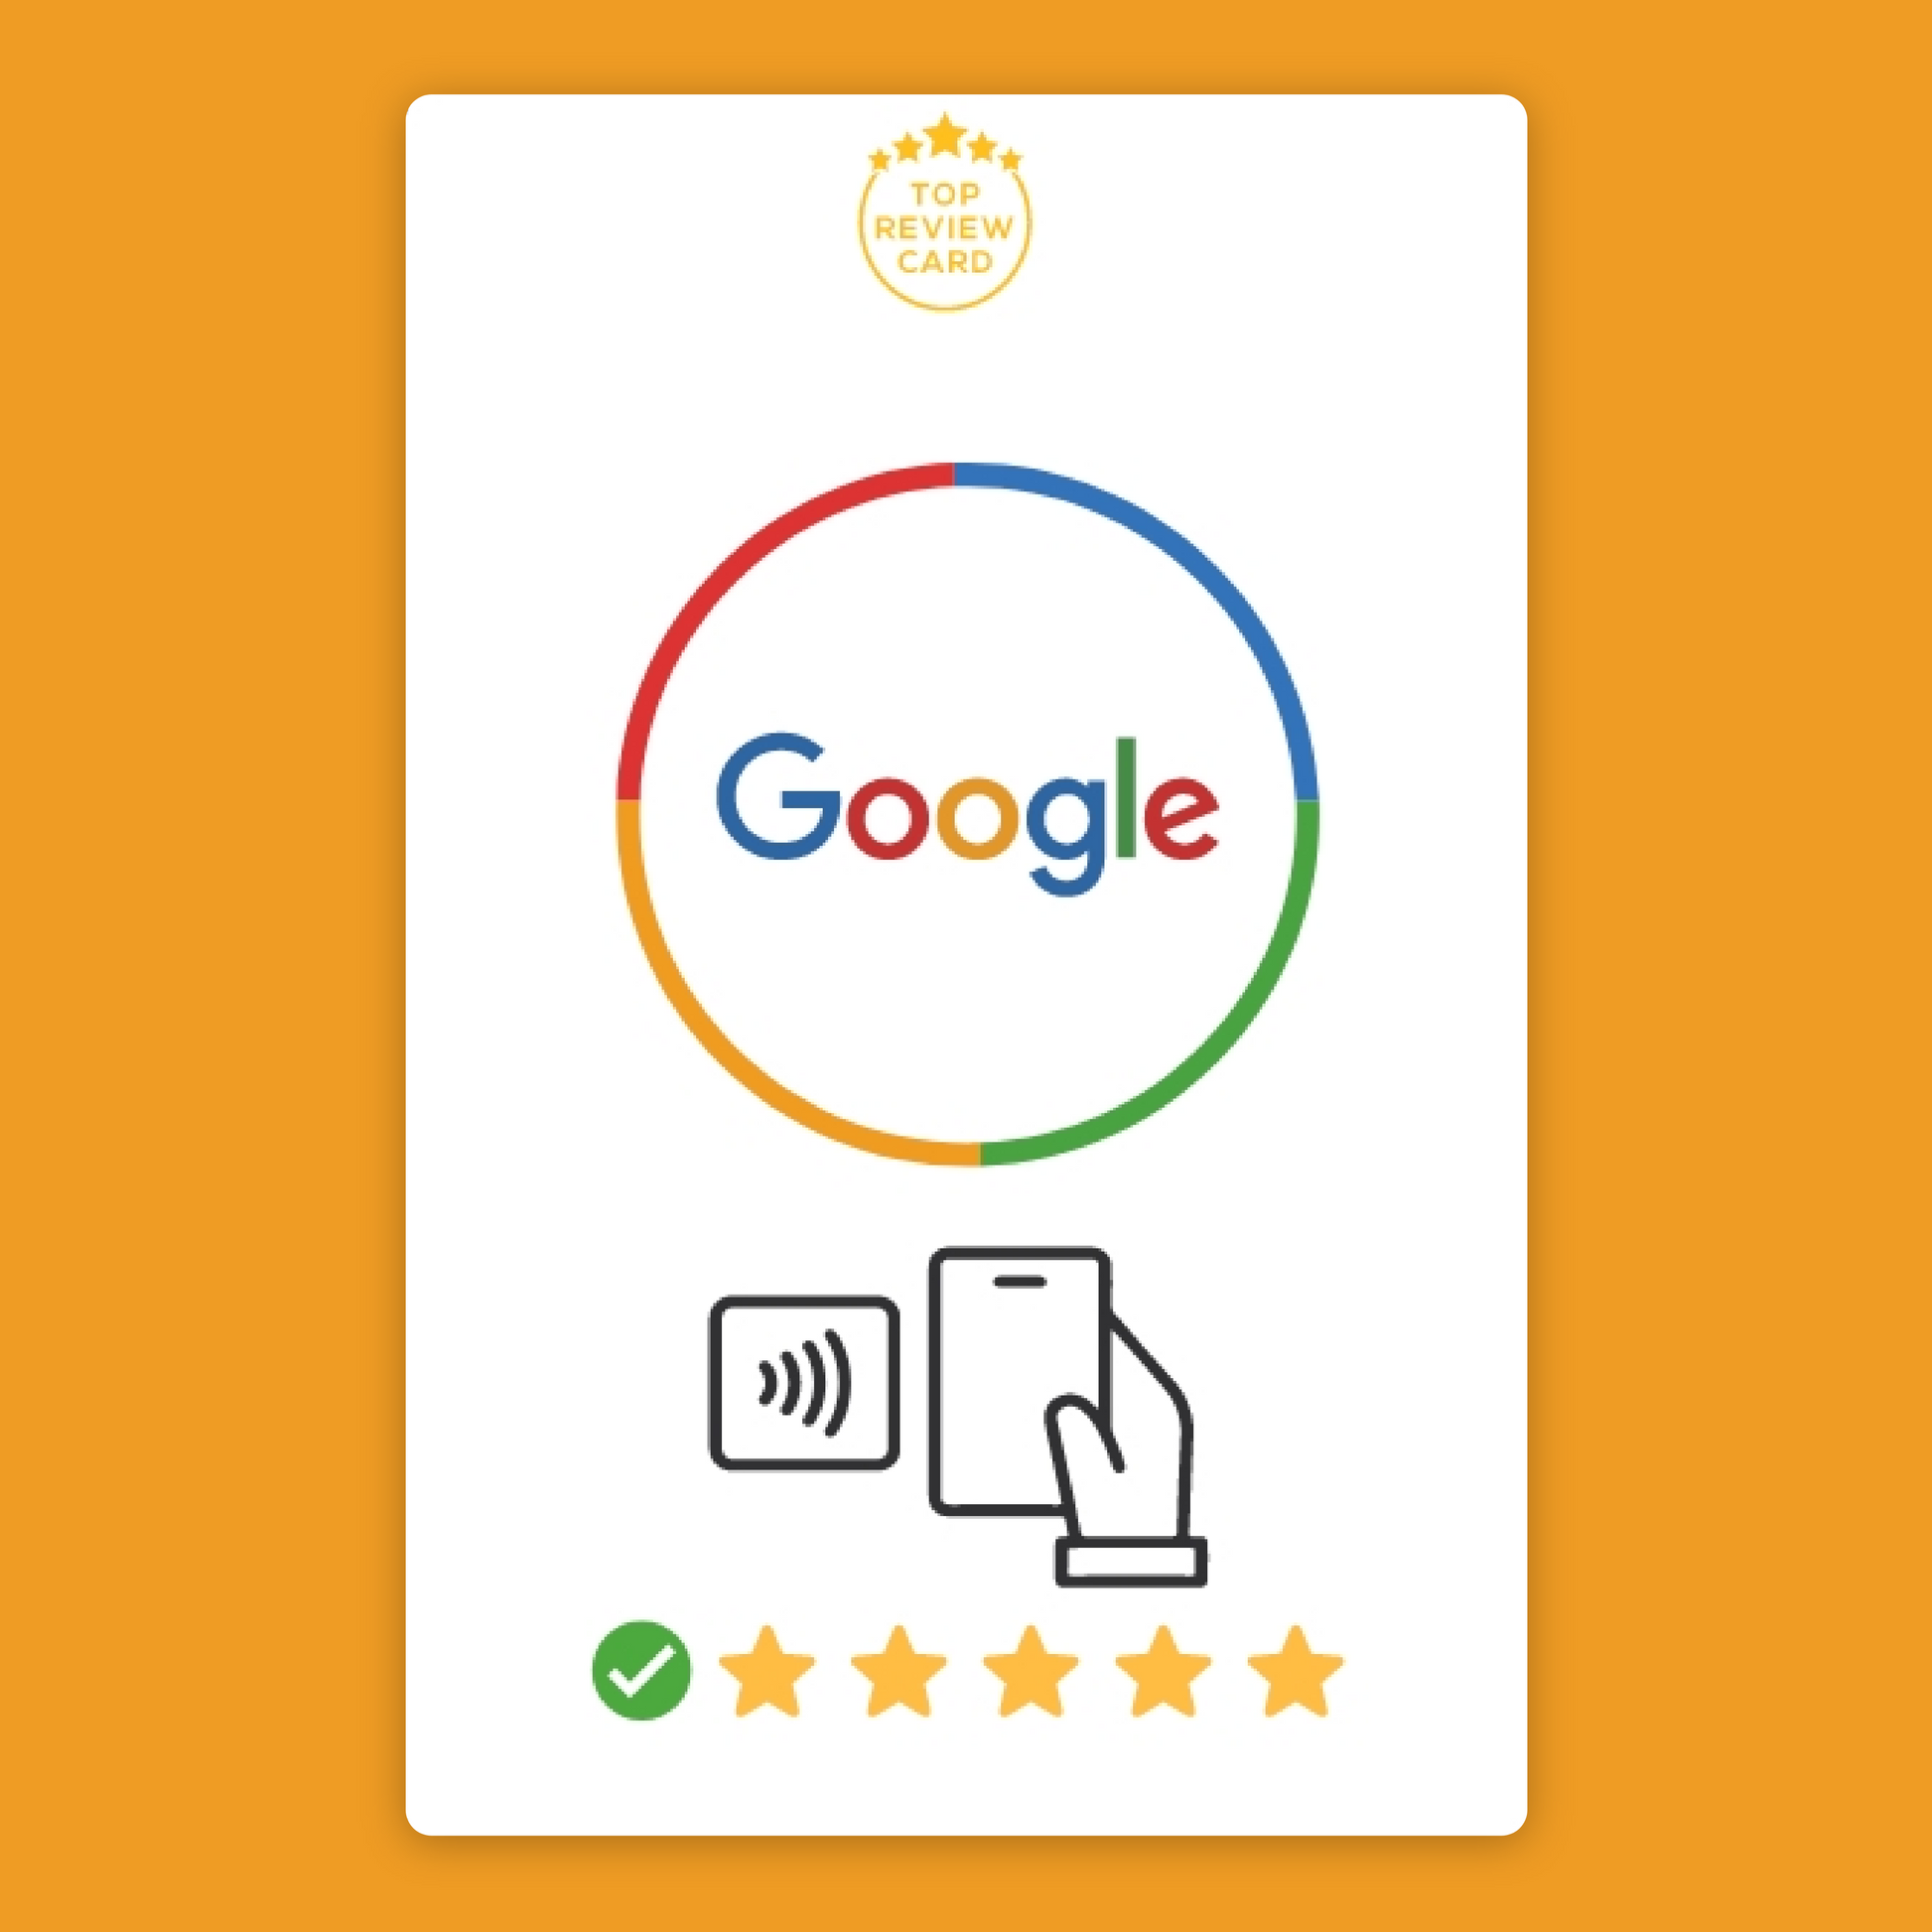 Showcase Your Success Stories Transform your best reviews into compelling stories with our Google Review Cards. Each card is a snapshot of customer satisfaction, showcasing the success stories that define your business.